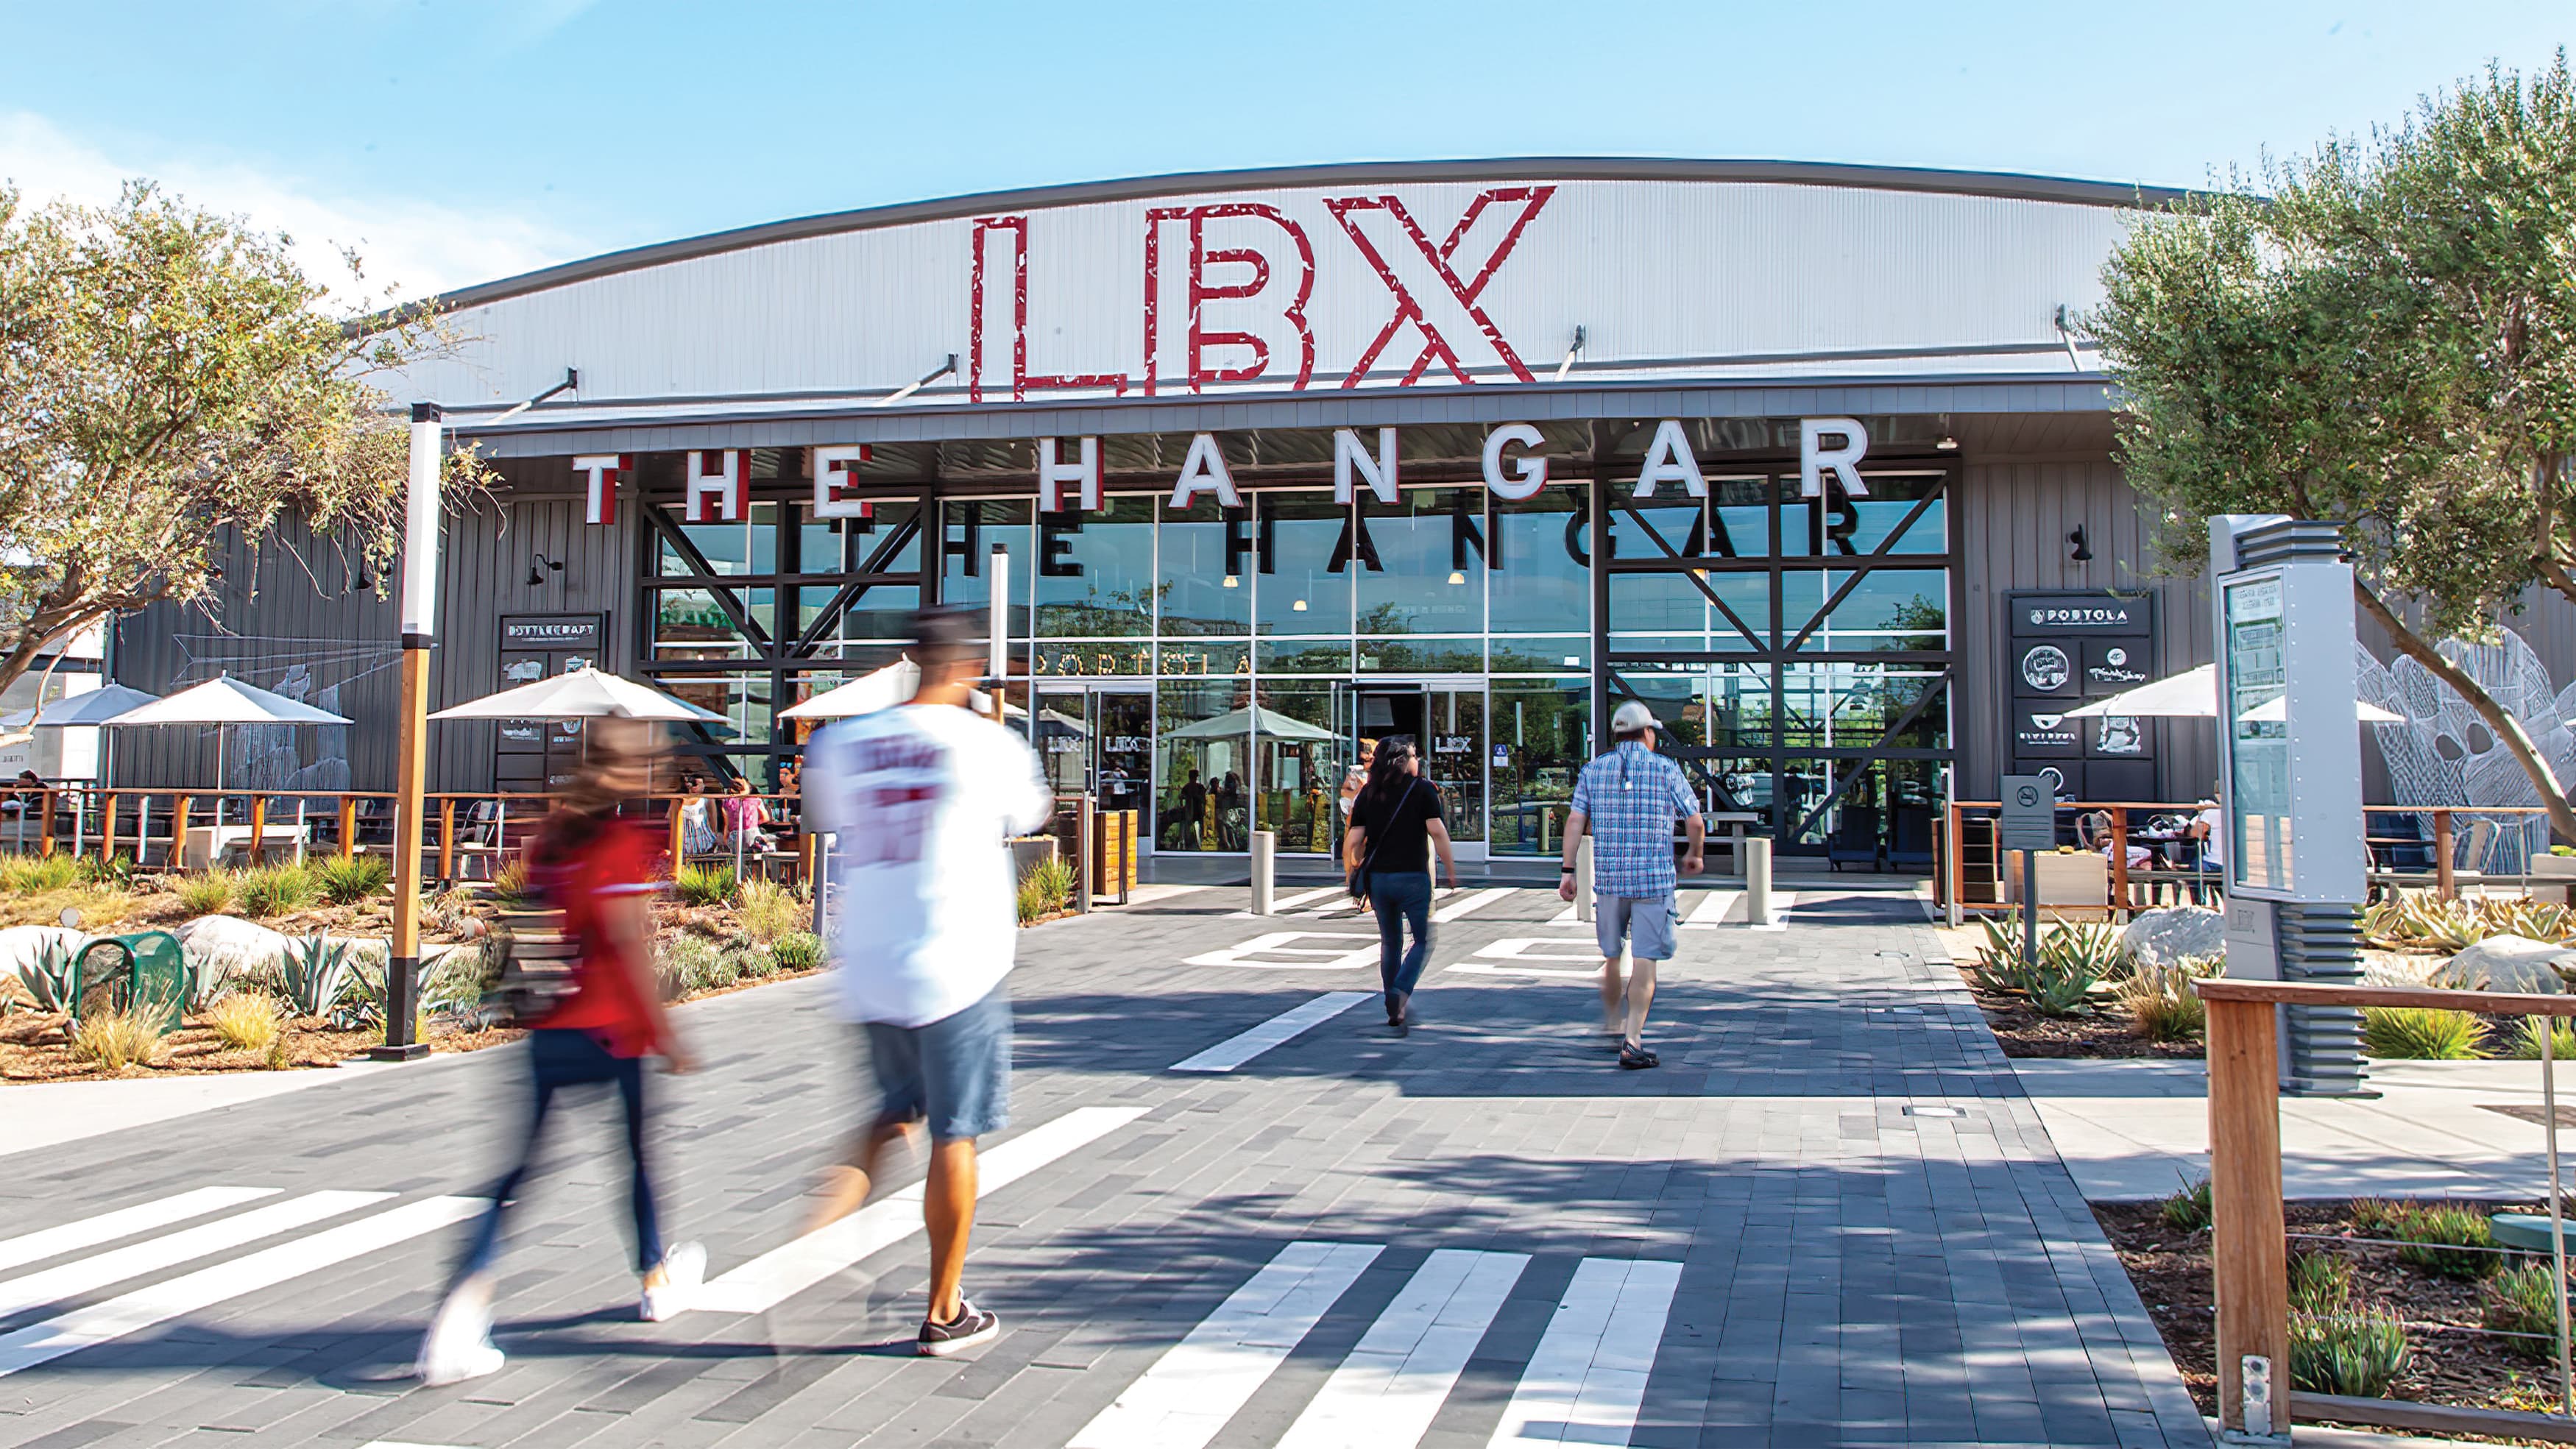 People approach hangar style building with massive painted "LBX" identity and dimensional "The Hangar" channel letters